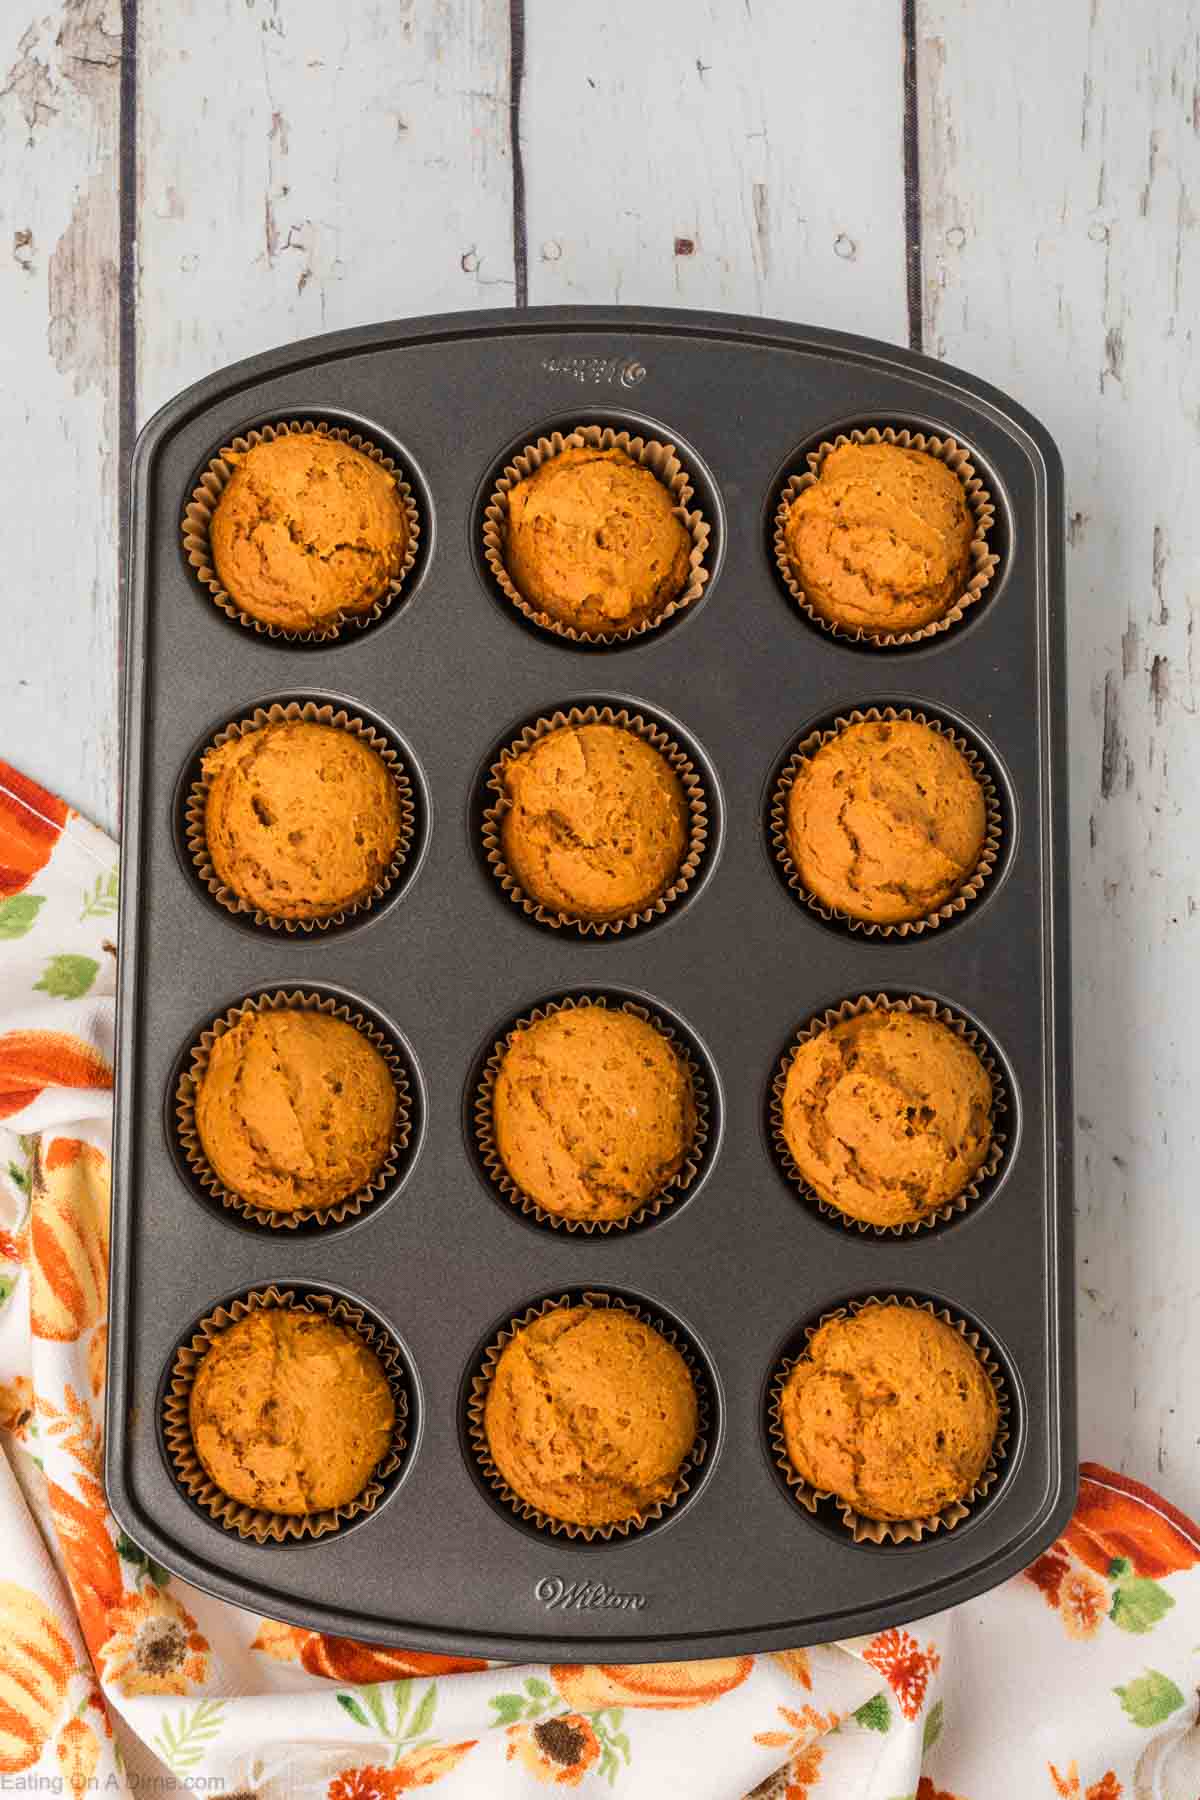 A muffin tin filled with twelve freshly baked 2 ingredient pumpkin muffins, each in a brown paper liner. The tin is placed on a rustic wooden surface, and a colorful orange and white kitchen towel is partially visible at the bottom left corner of the image.